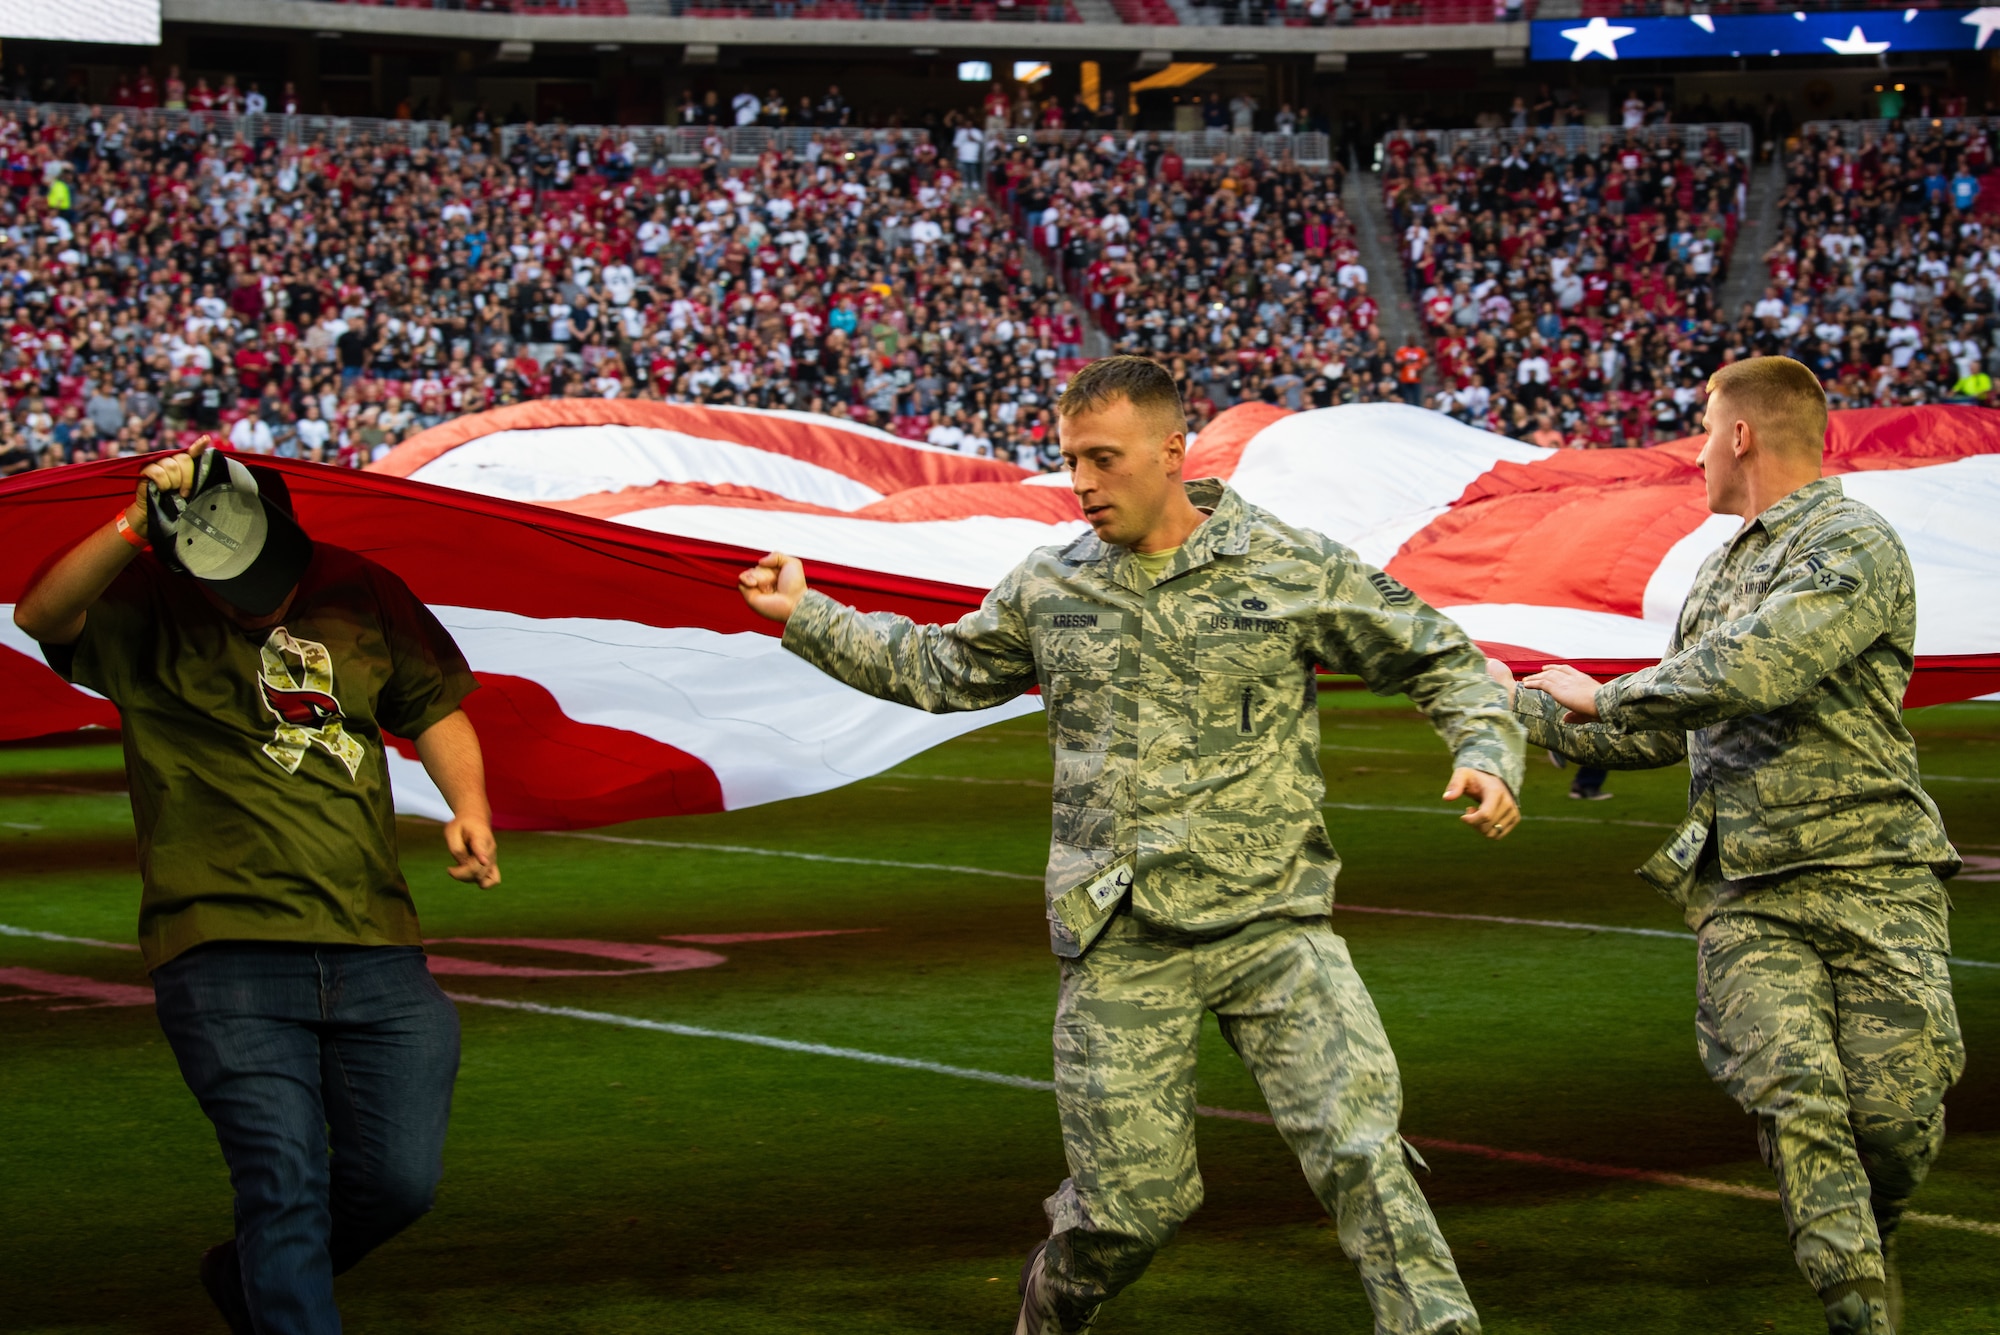 Tech. Sgt. Darren Kressin, 310th Aircraft Maintenance Unit F-16 Fighting Falcon weapons expeditor, helps unfurl an American flag during the Arizona Cardinals Salute to Service football game, Nov. 18, 2018 at the State Farm Stadium, Glendale, Ariz.